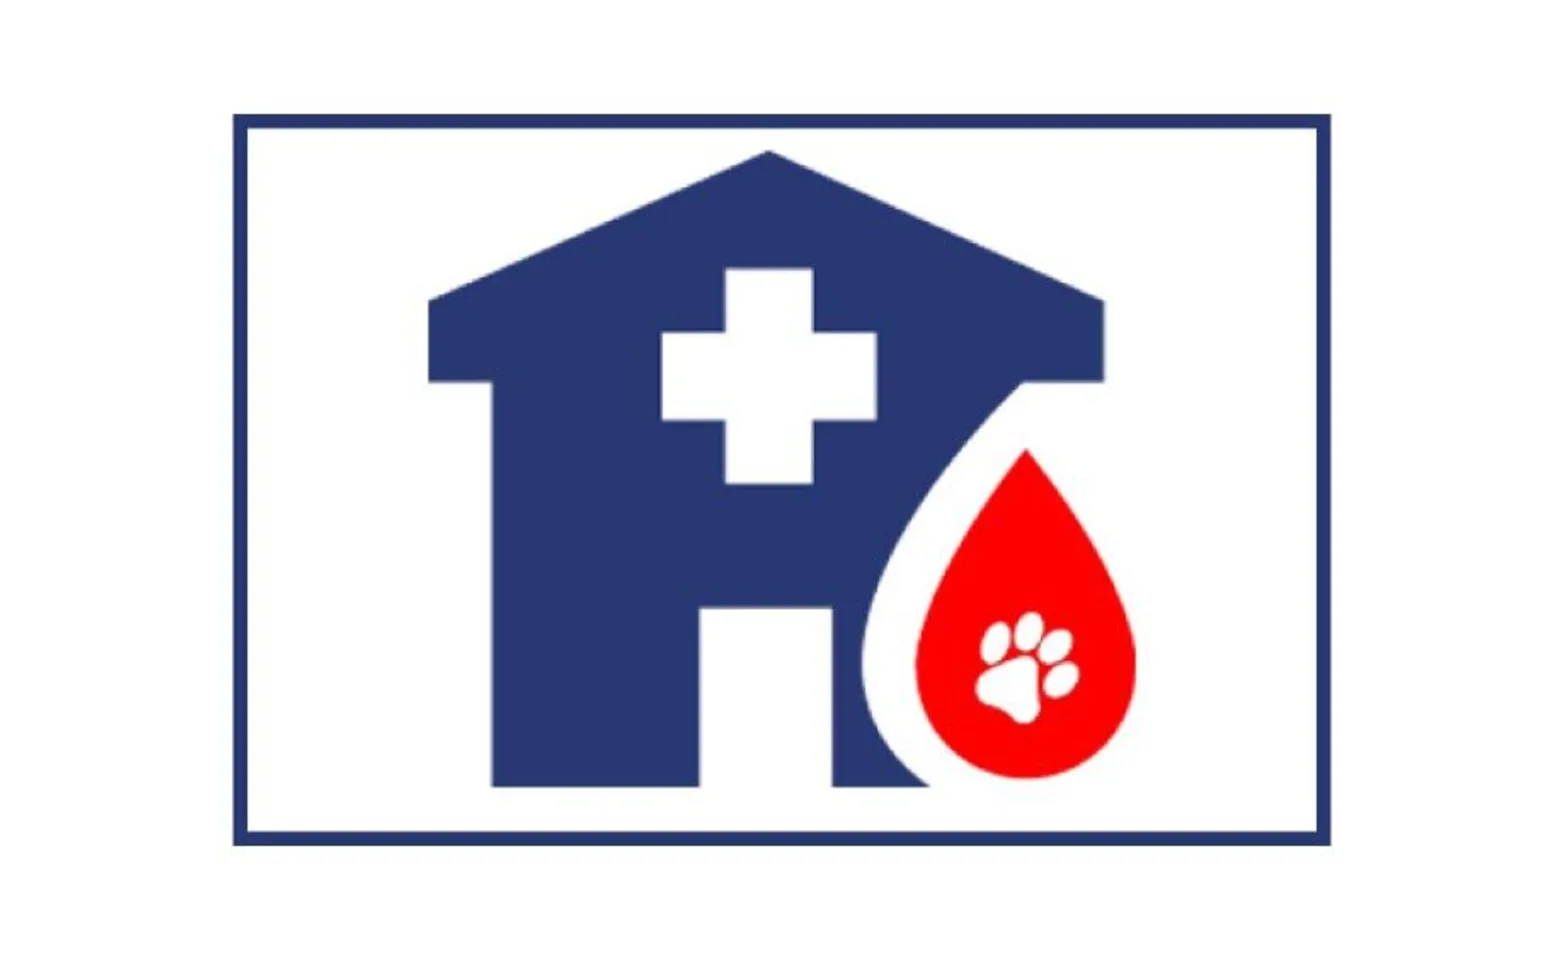 Hospital icon with blood drop on the side containing a paw print